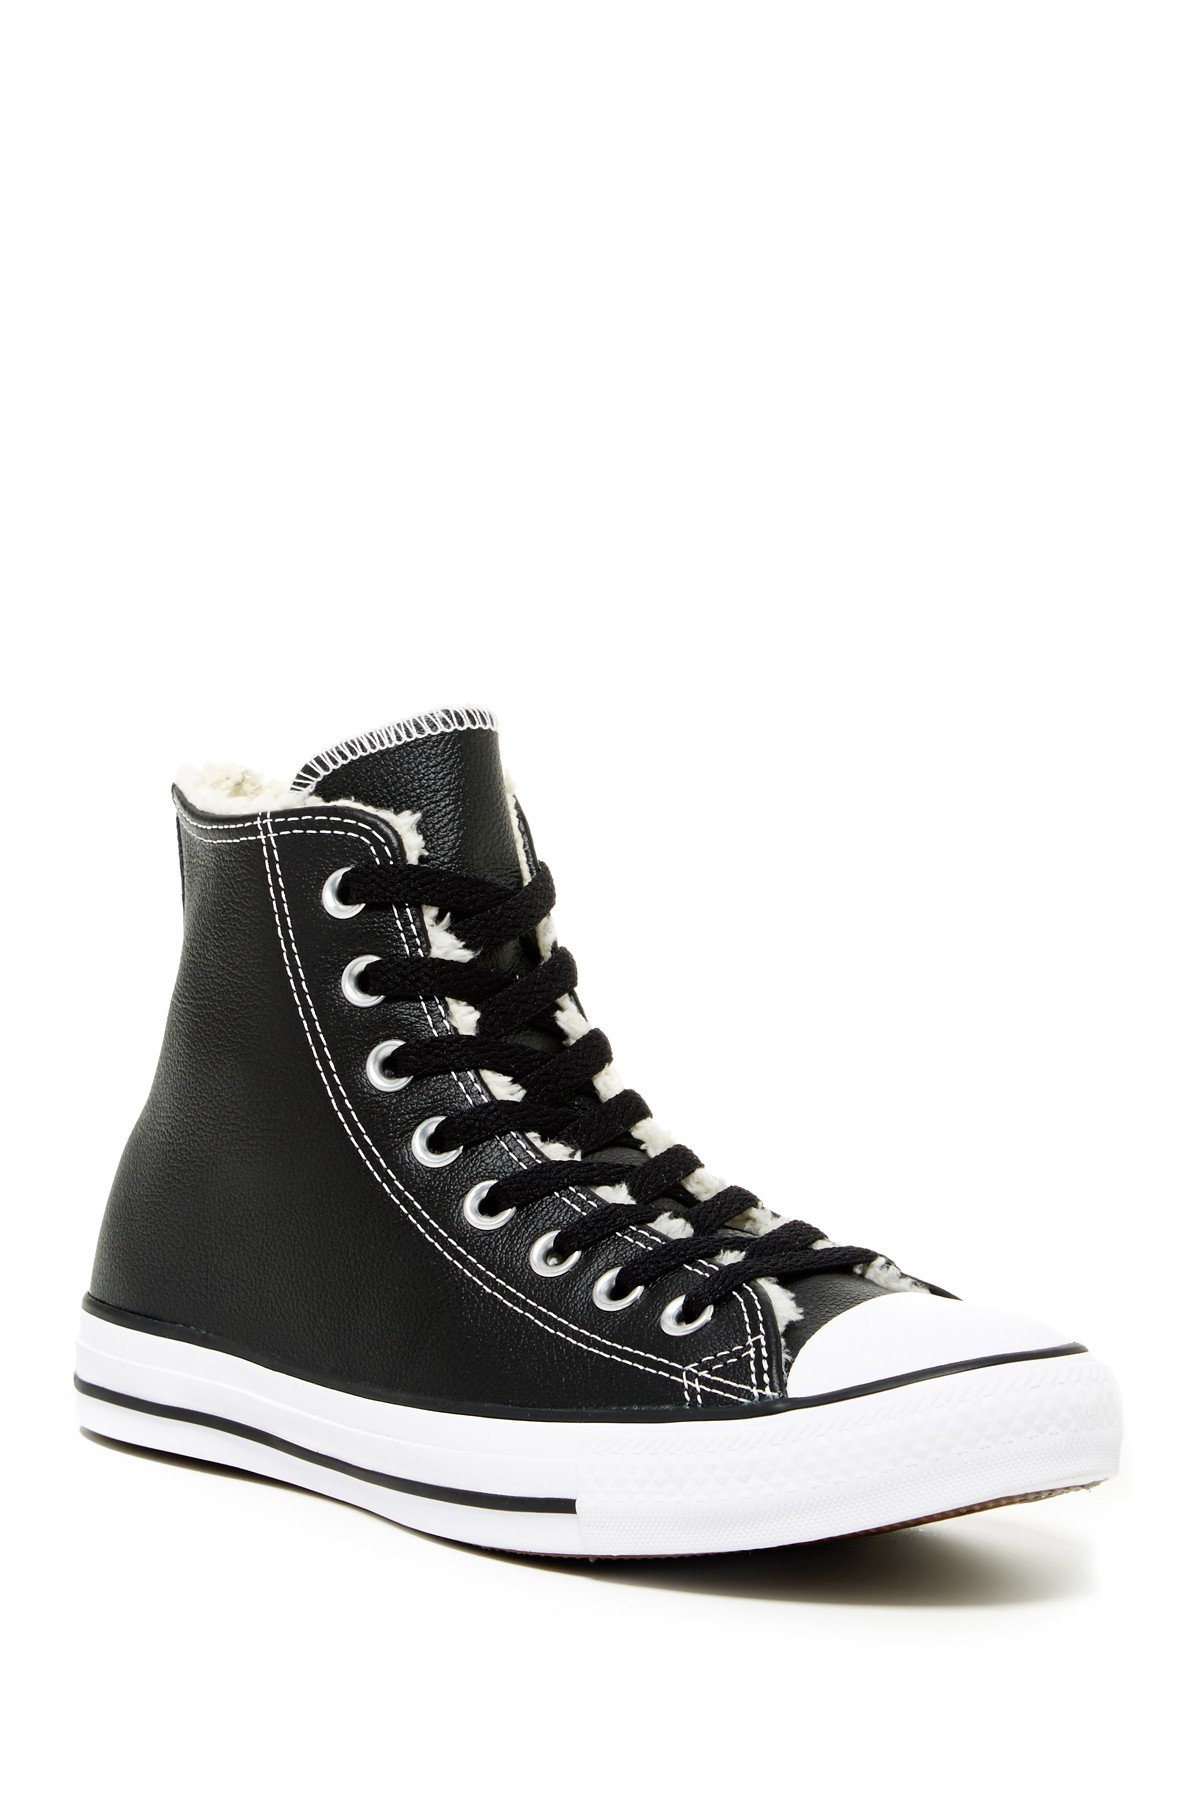 Converse Chuck Taylor High Top Faux Fur Lined Sneaker (unisex) in Black ...